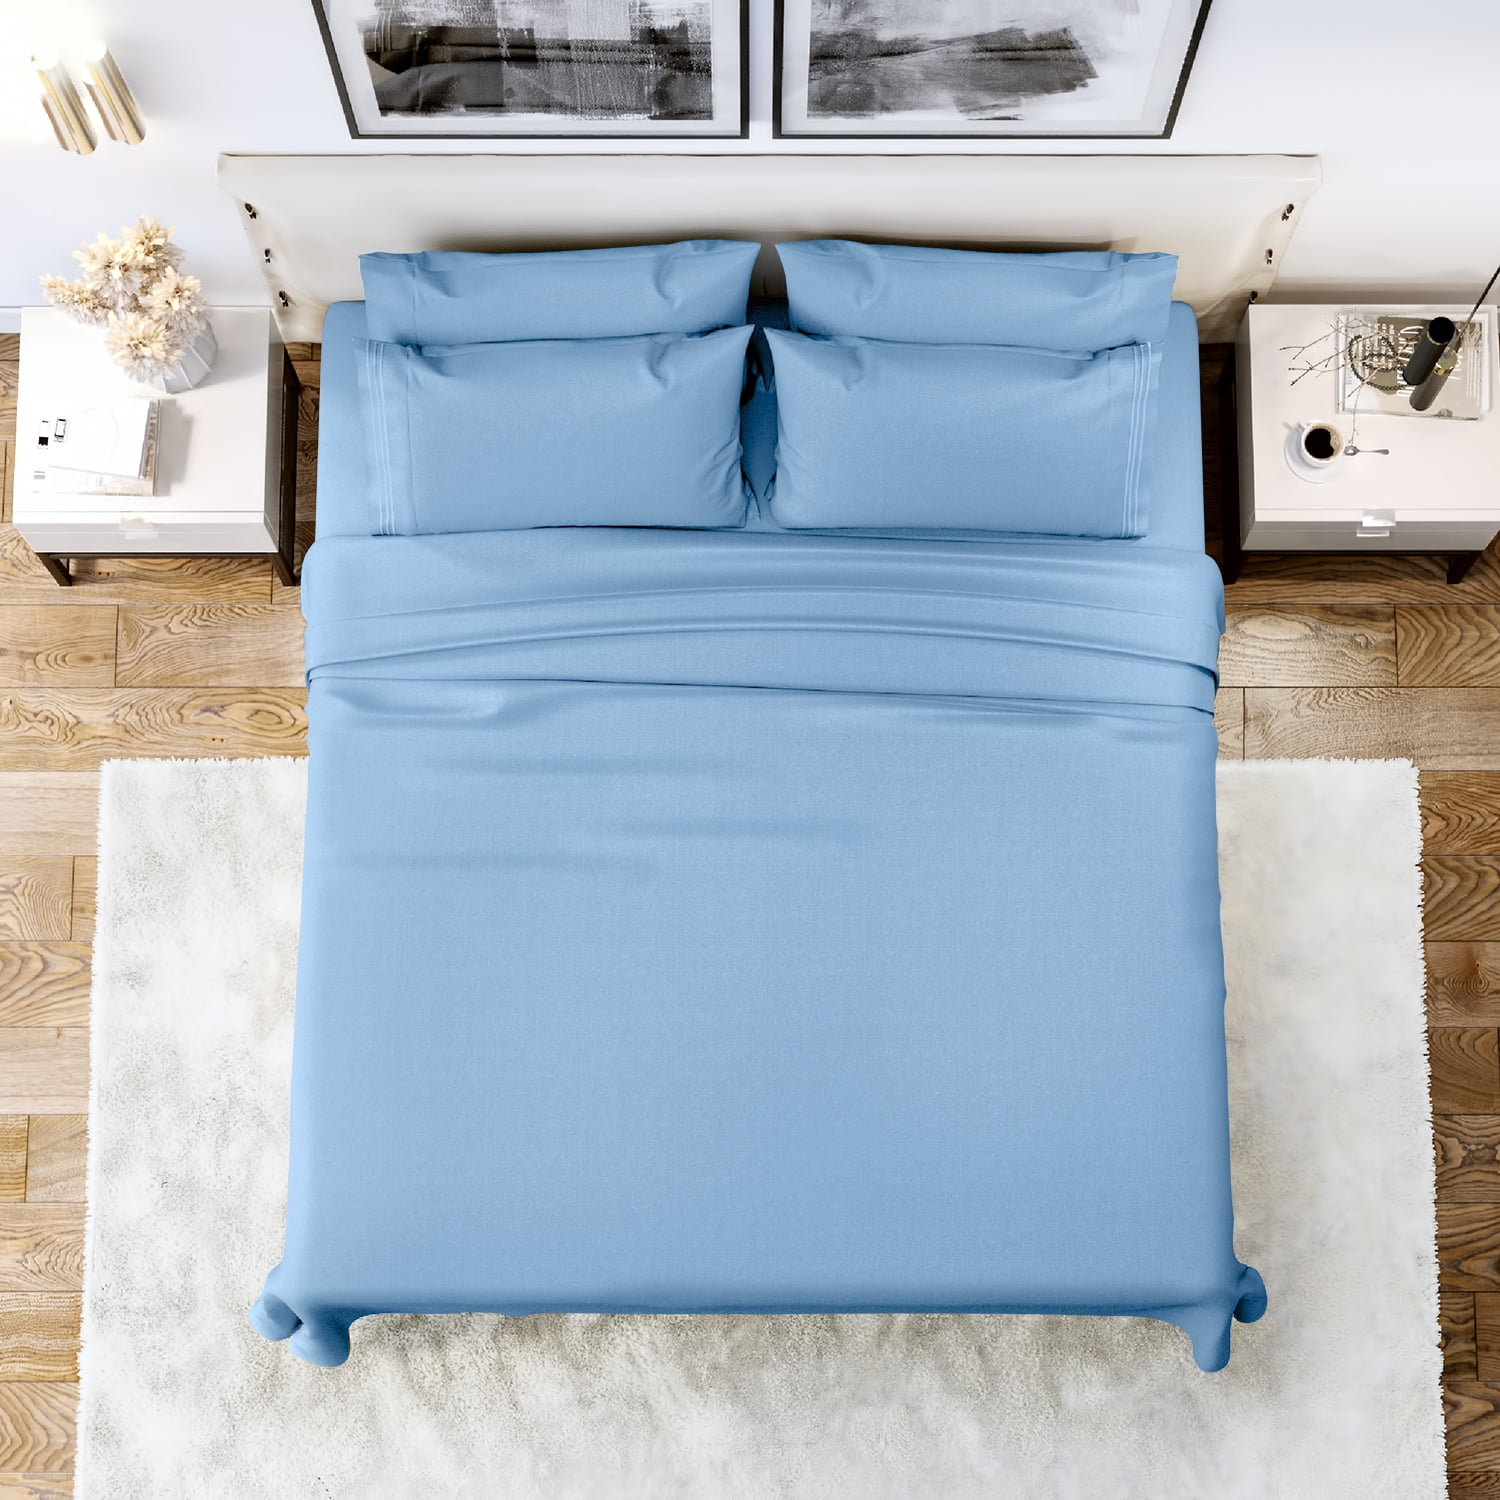 1 Flat Sheet,1 Fitted Sheet and 2 Pillow Cases,Brushed Microfiber Luxury Bedding with Deep Pockets Queen,Baby Blue 4 Piece Bed Sheet Set